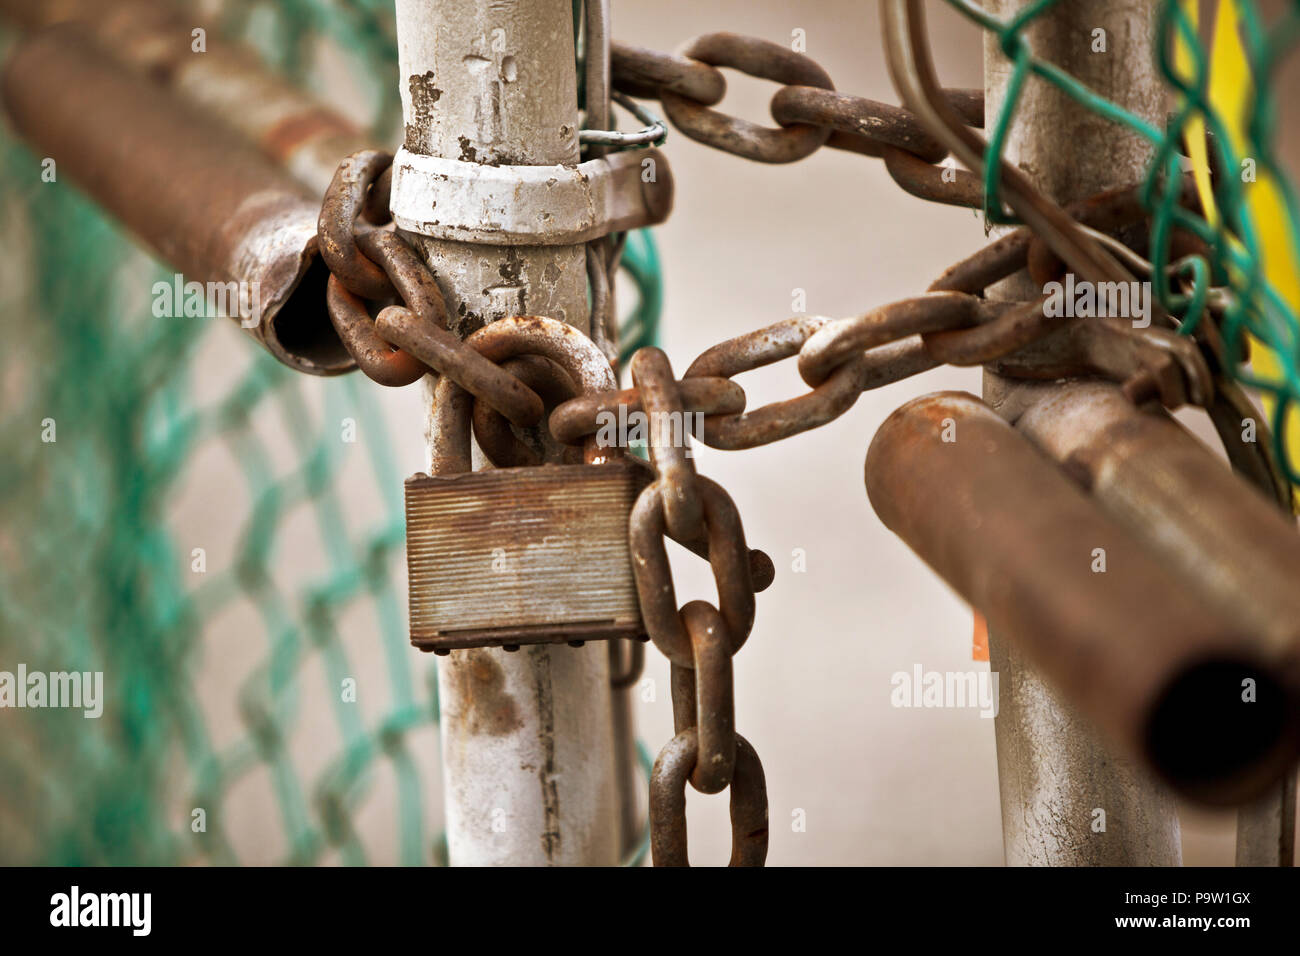 Gate lock with Rusty lock and chain Stock Photo